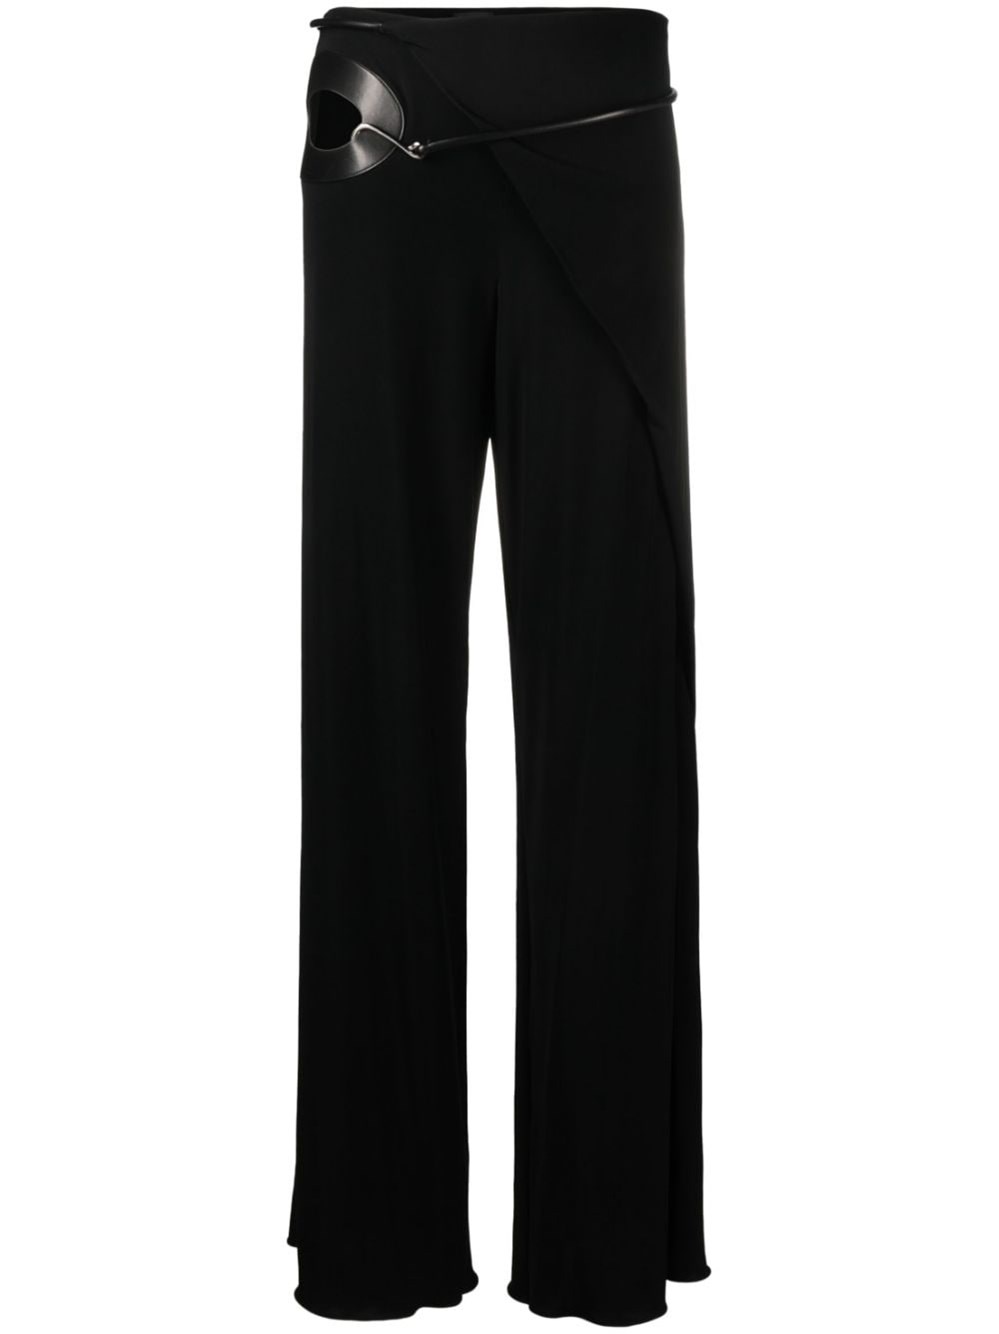 TOM FORD WIDE LEG TROUSERS WITH CUT-OUT DETAIL